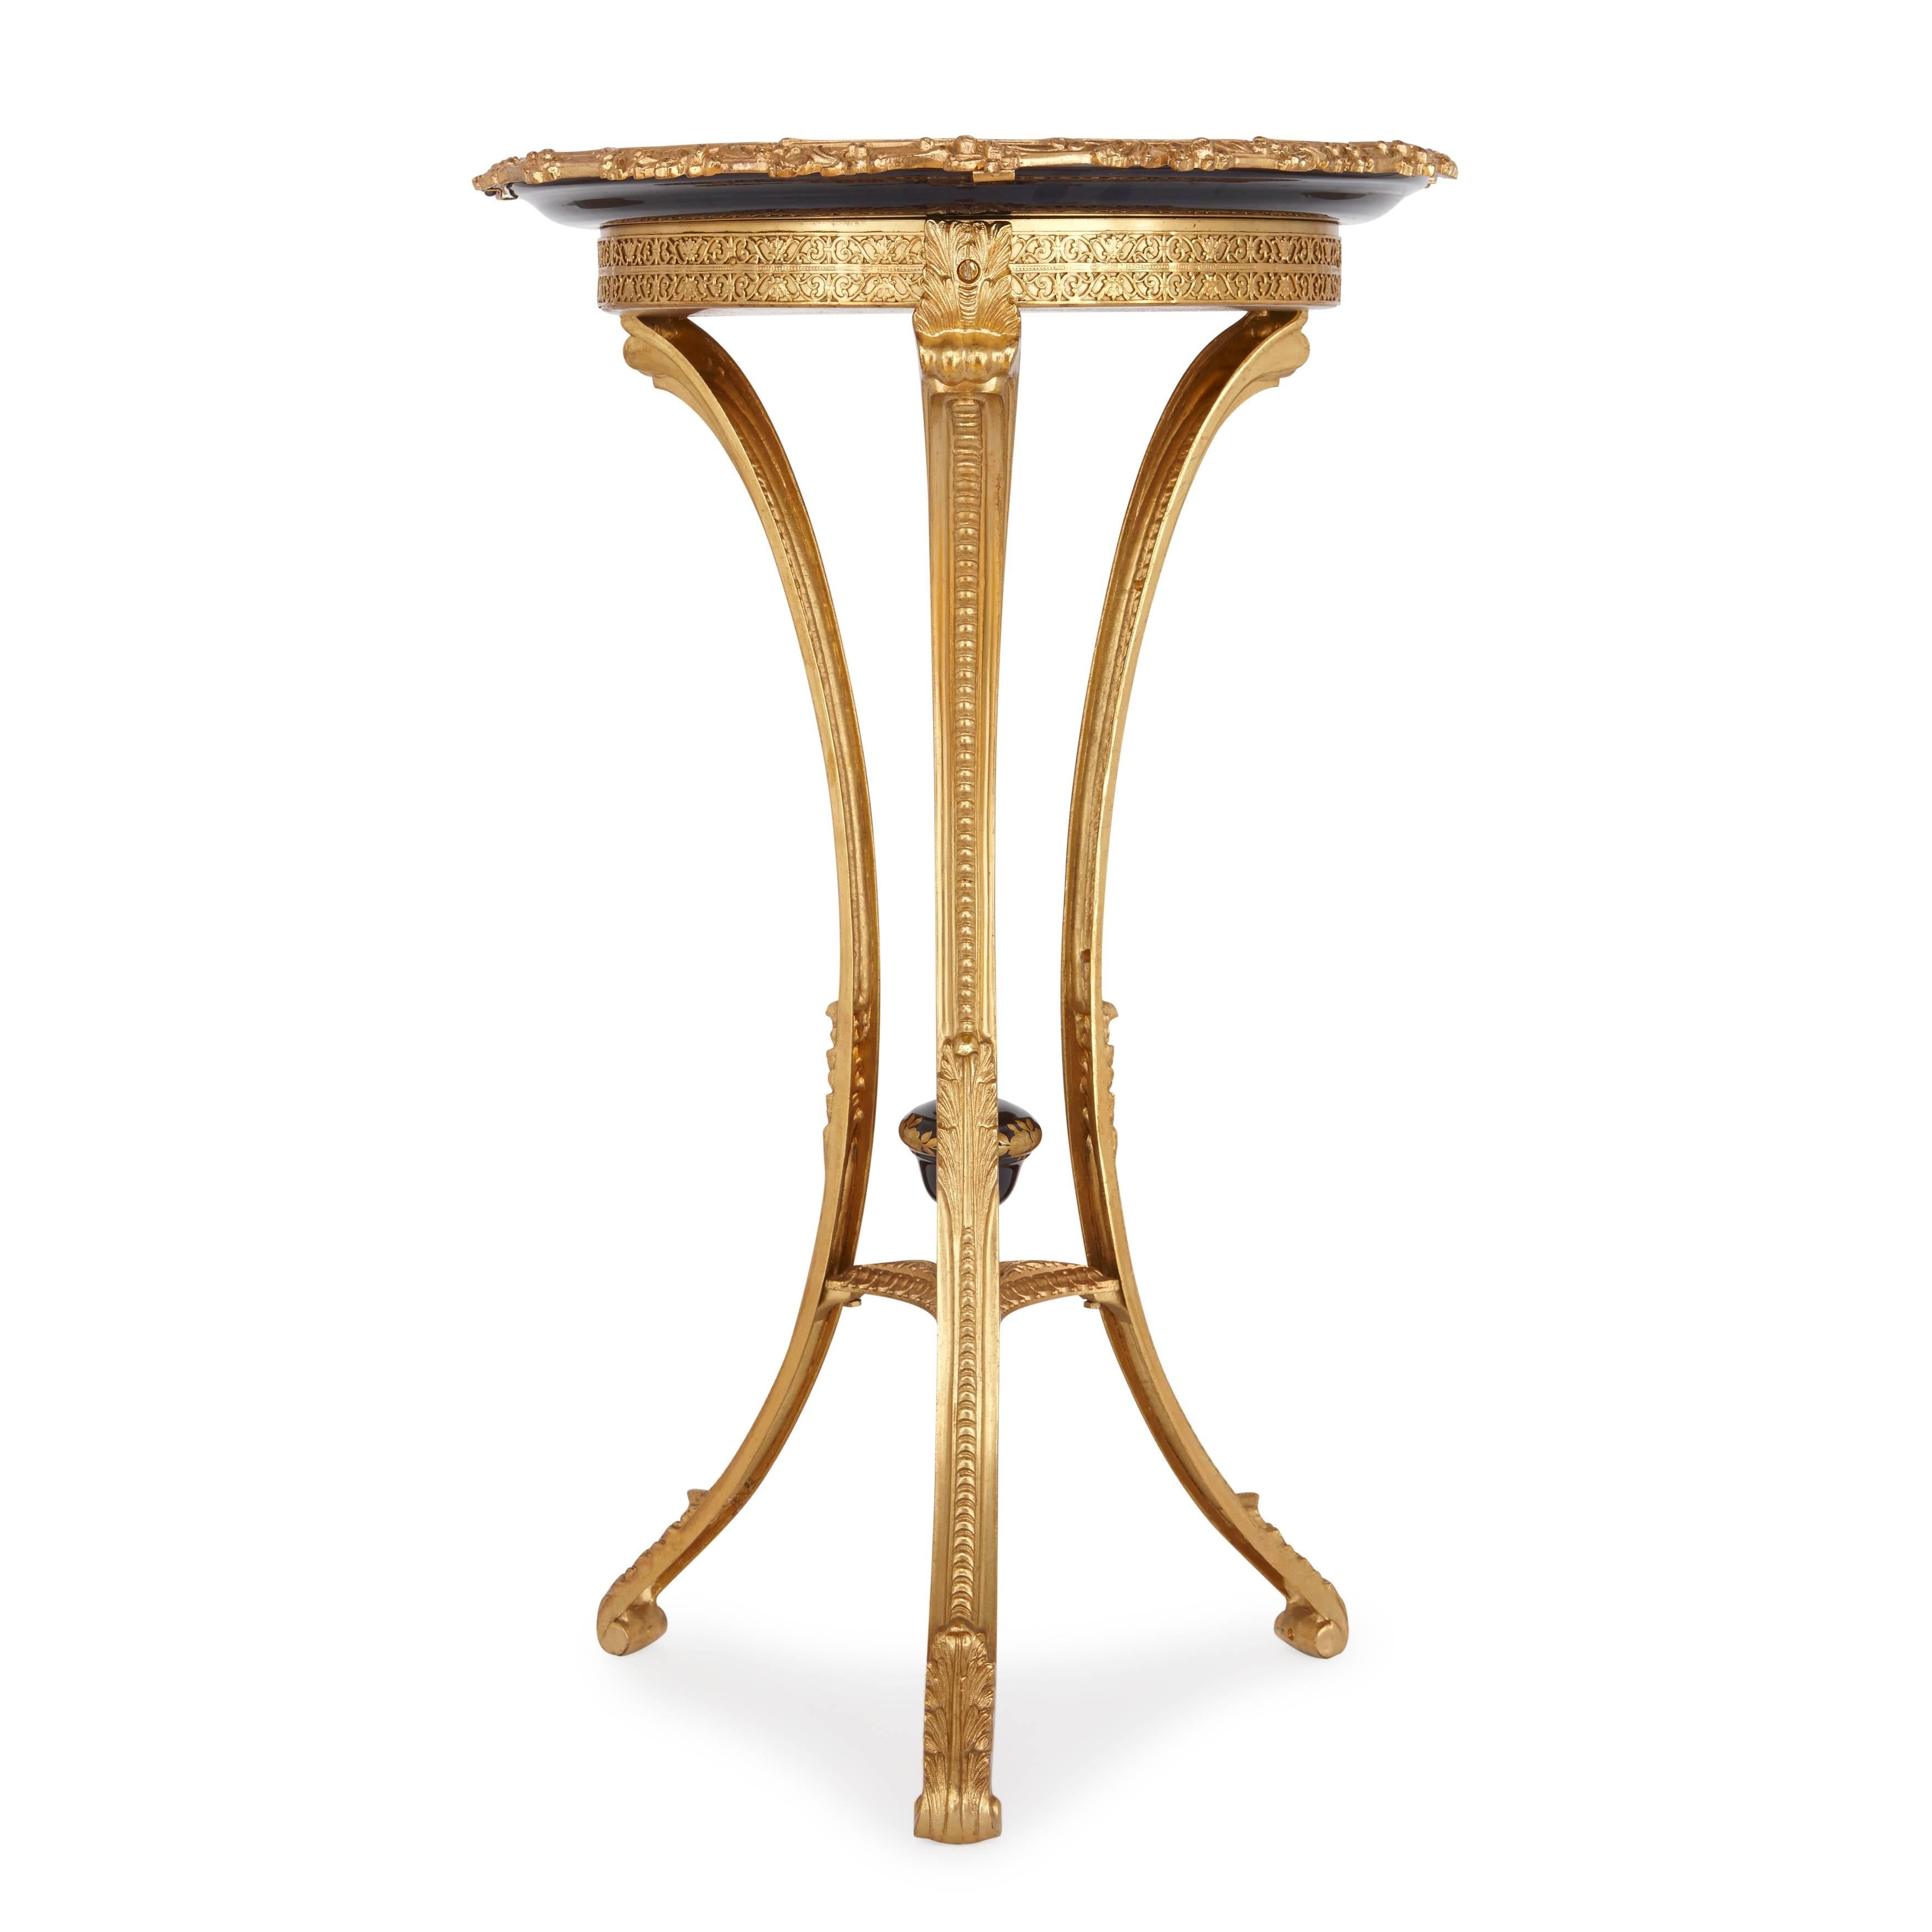 French Ormolu-Mounted Sevres Style Porcelain Gueridon Table